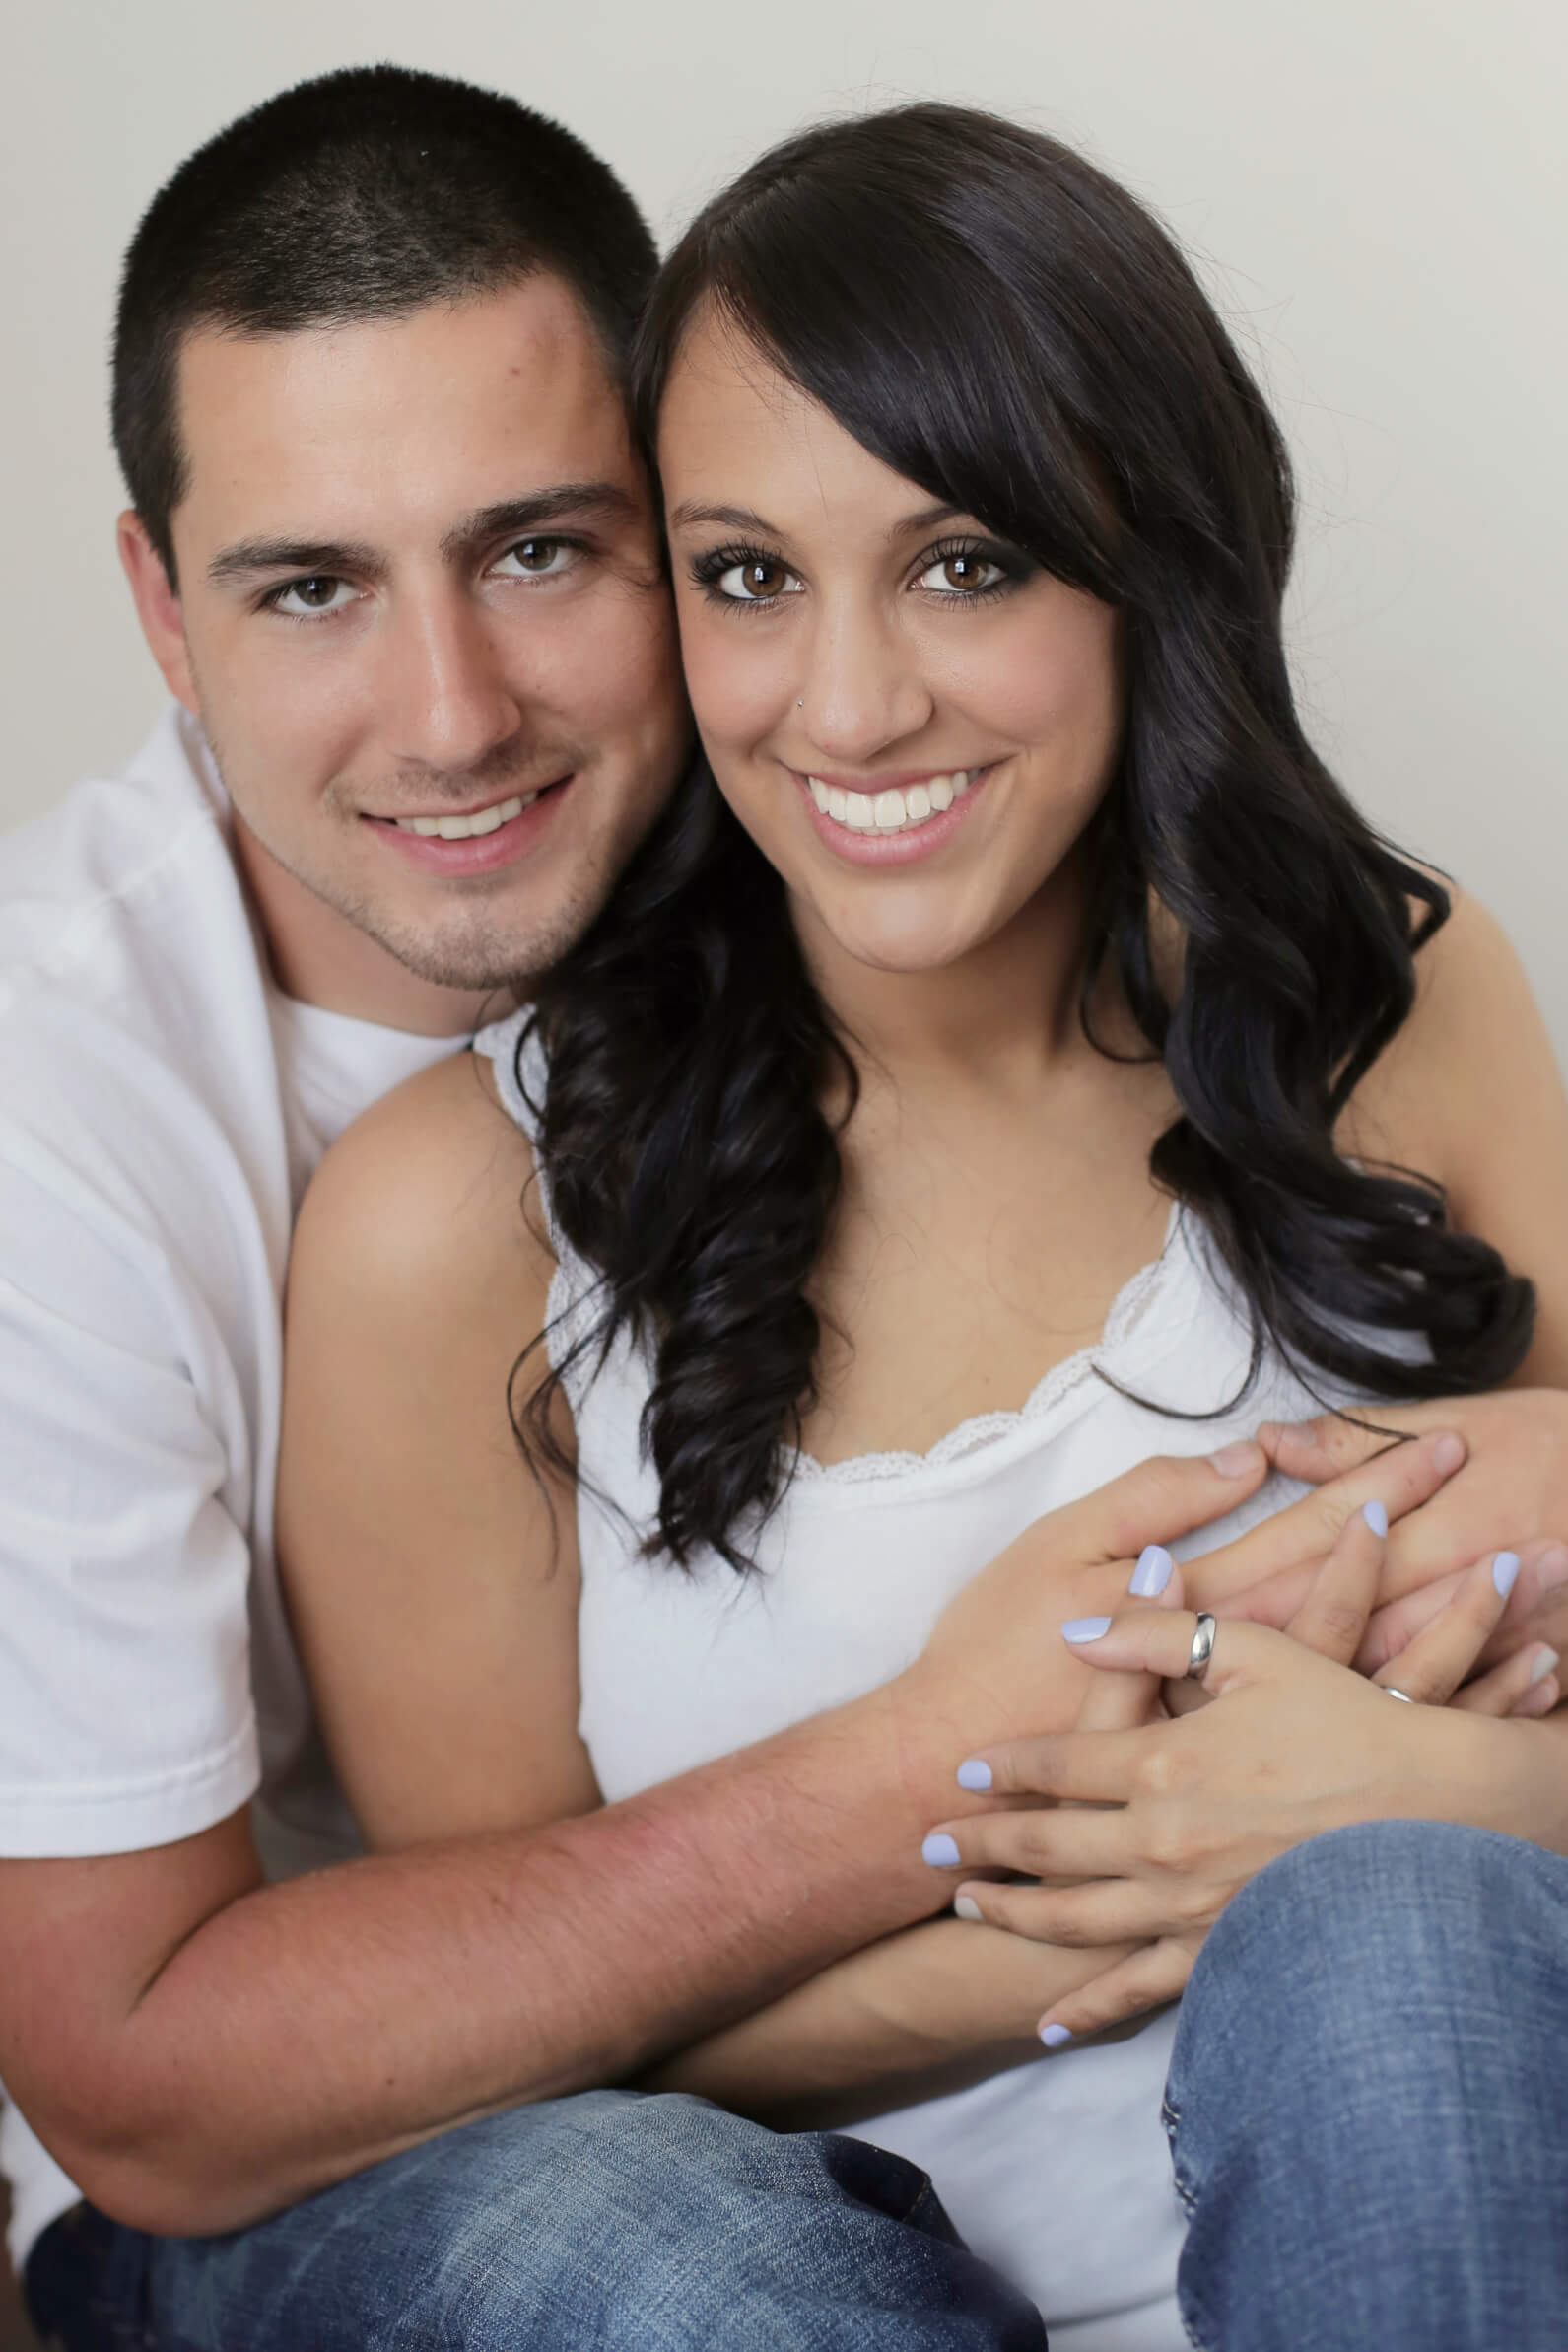 5 Tips For The Perfect Couple Photoshoot